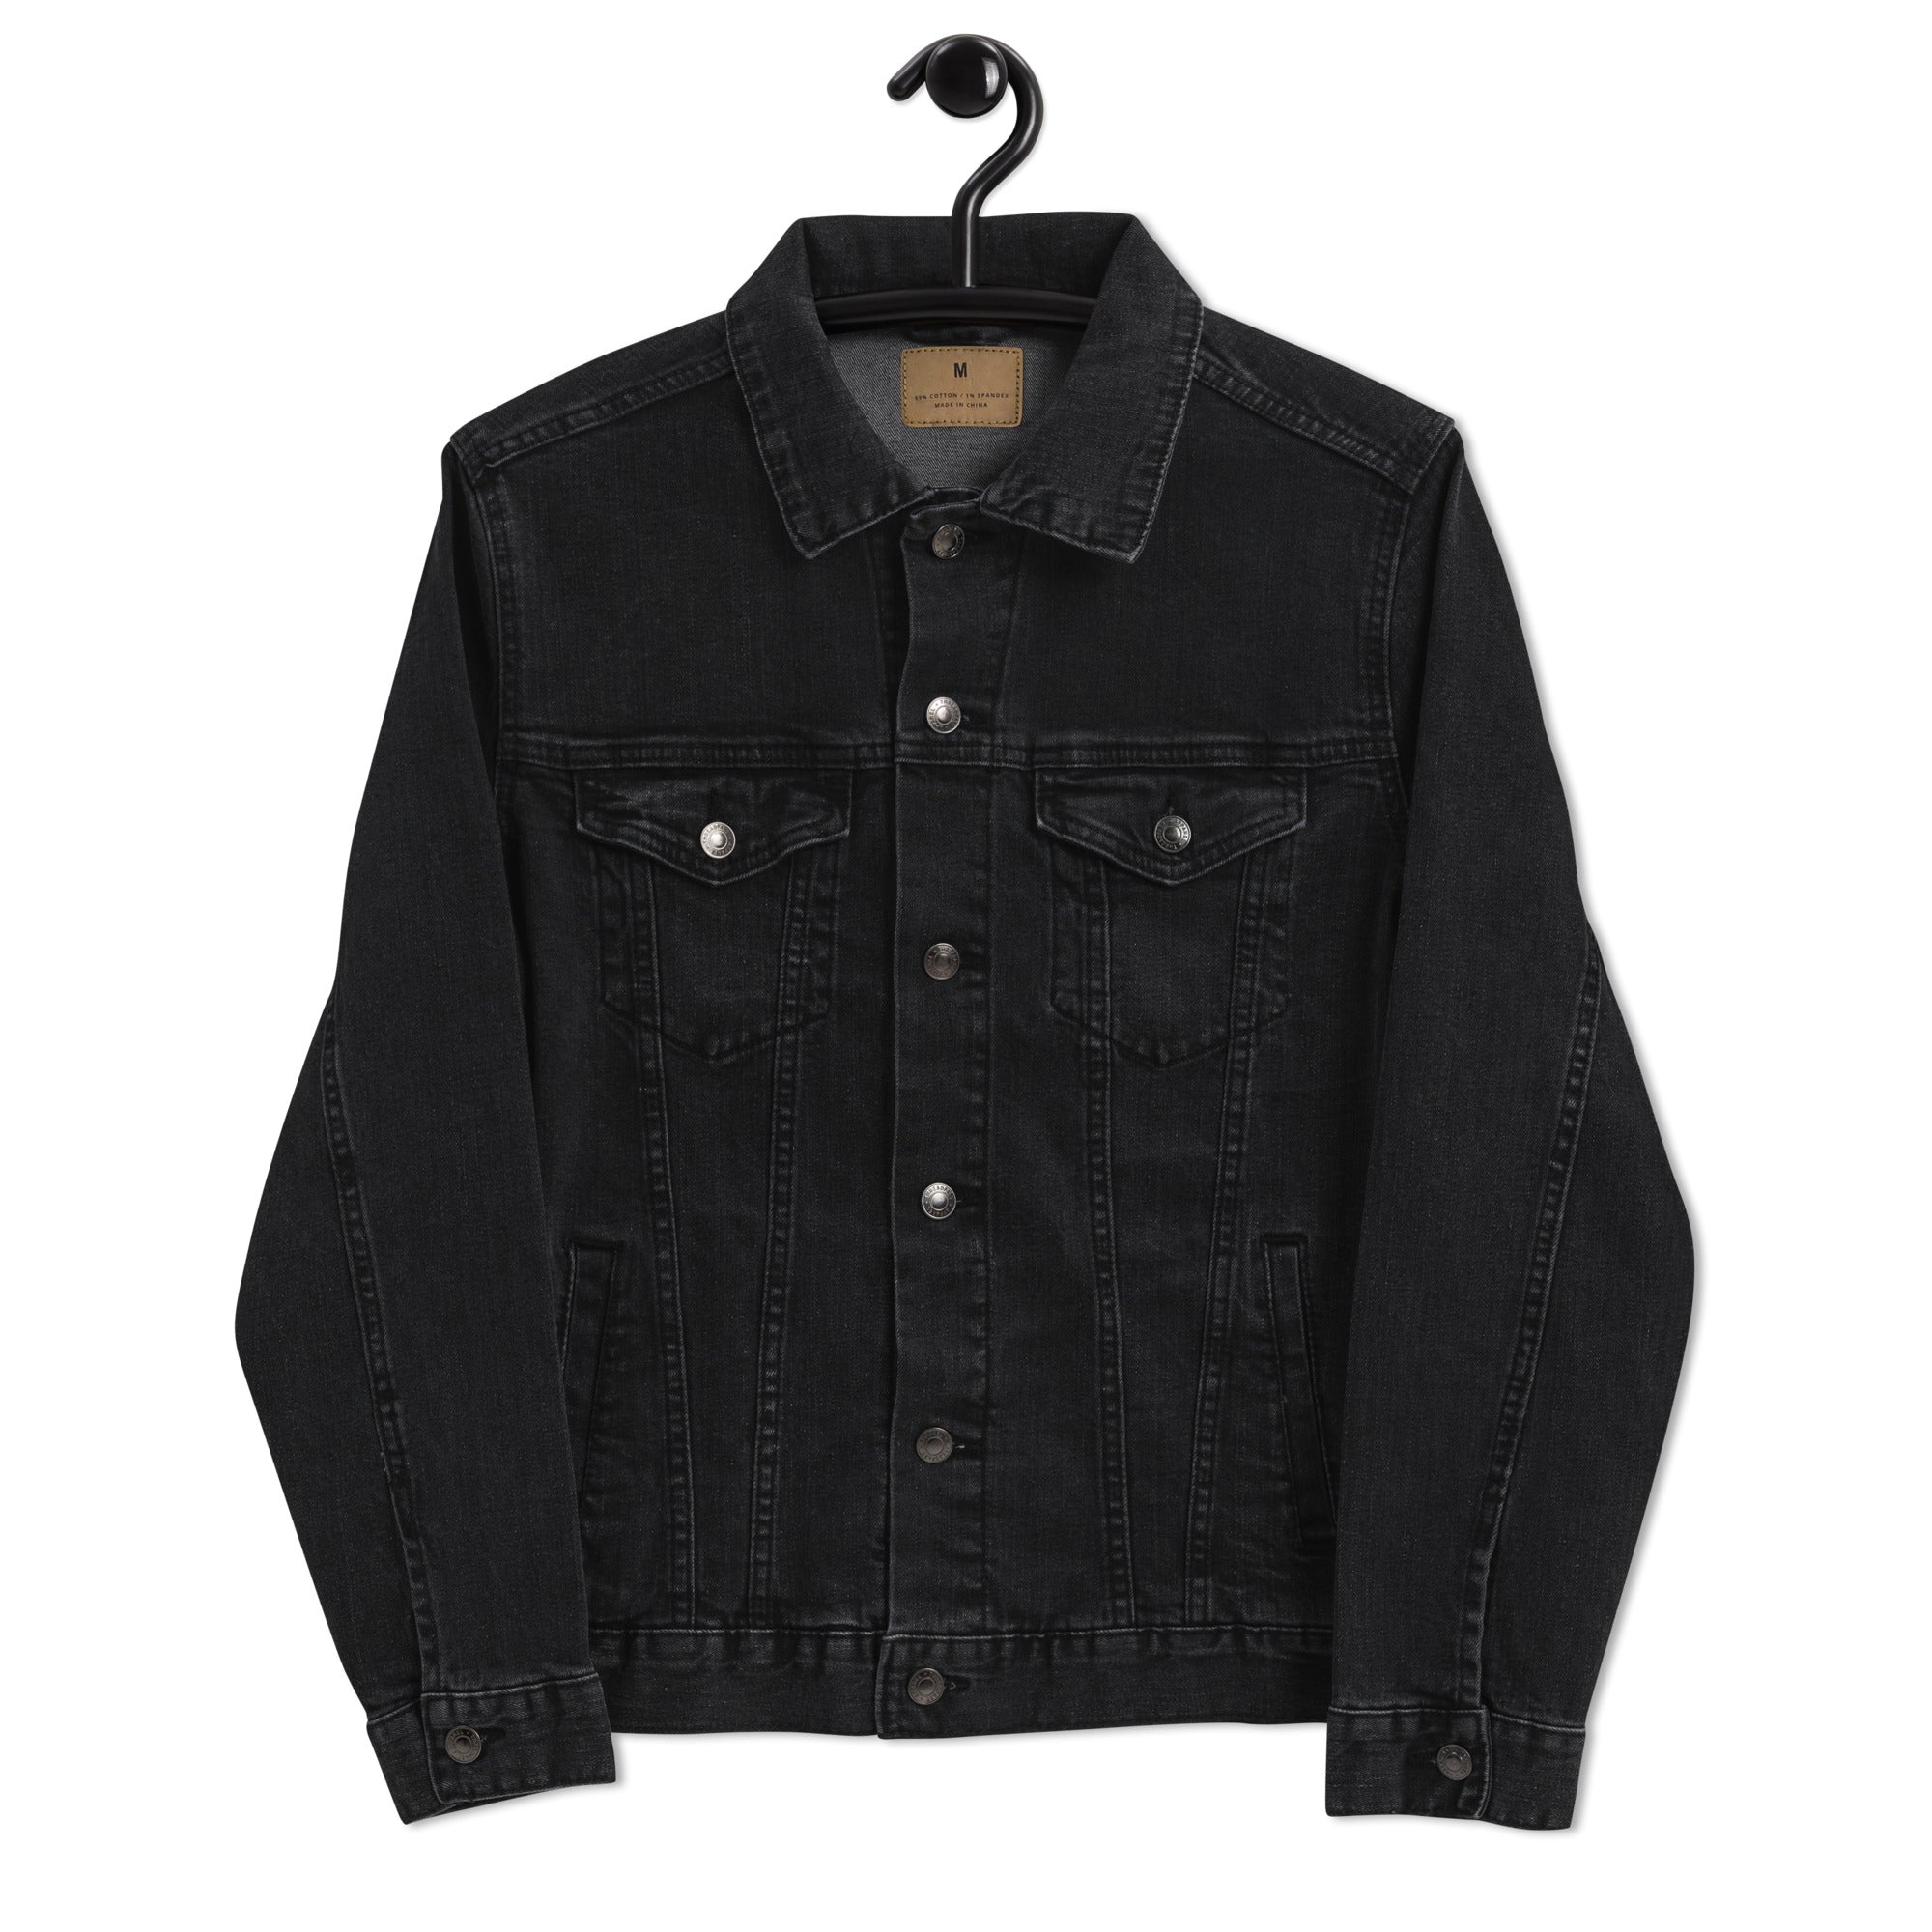 Young Deadly & Indigenous Denim Jacket